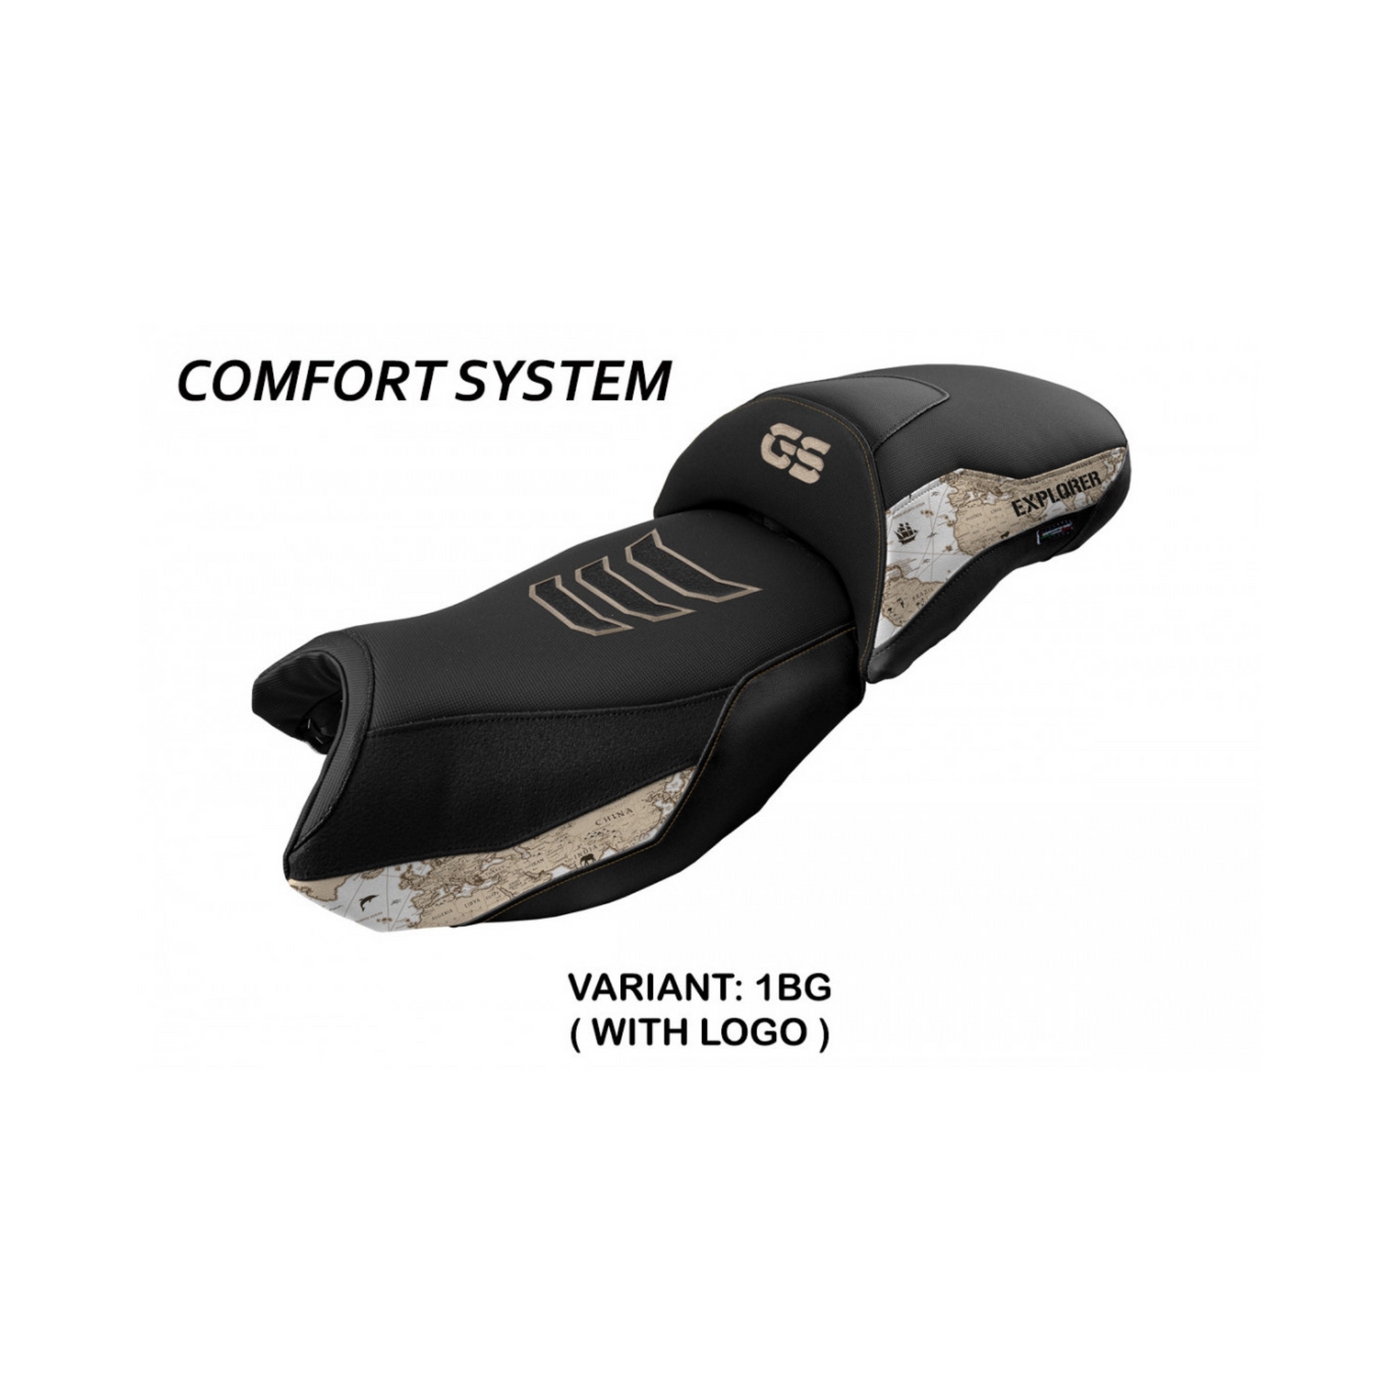 Ebern Comfort System Seat Cover for BMW R 1250 GS (2019-)